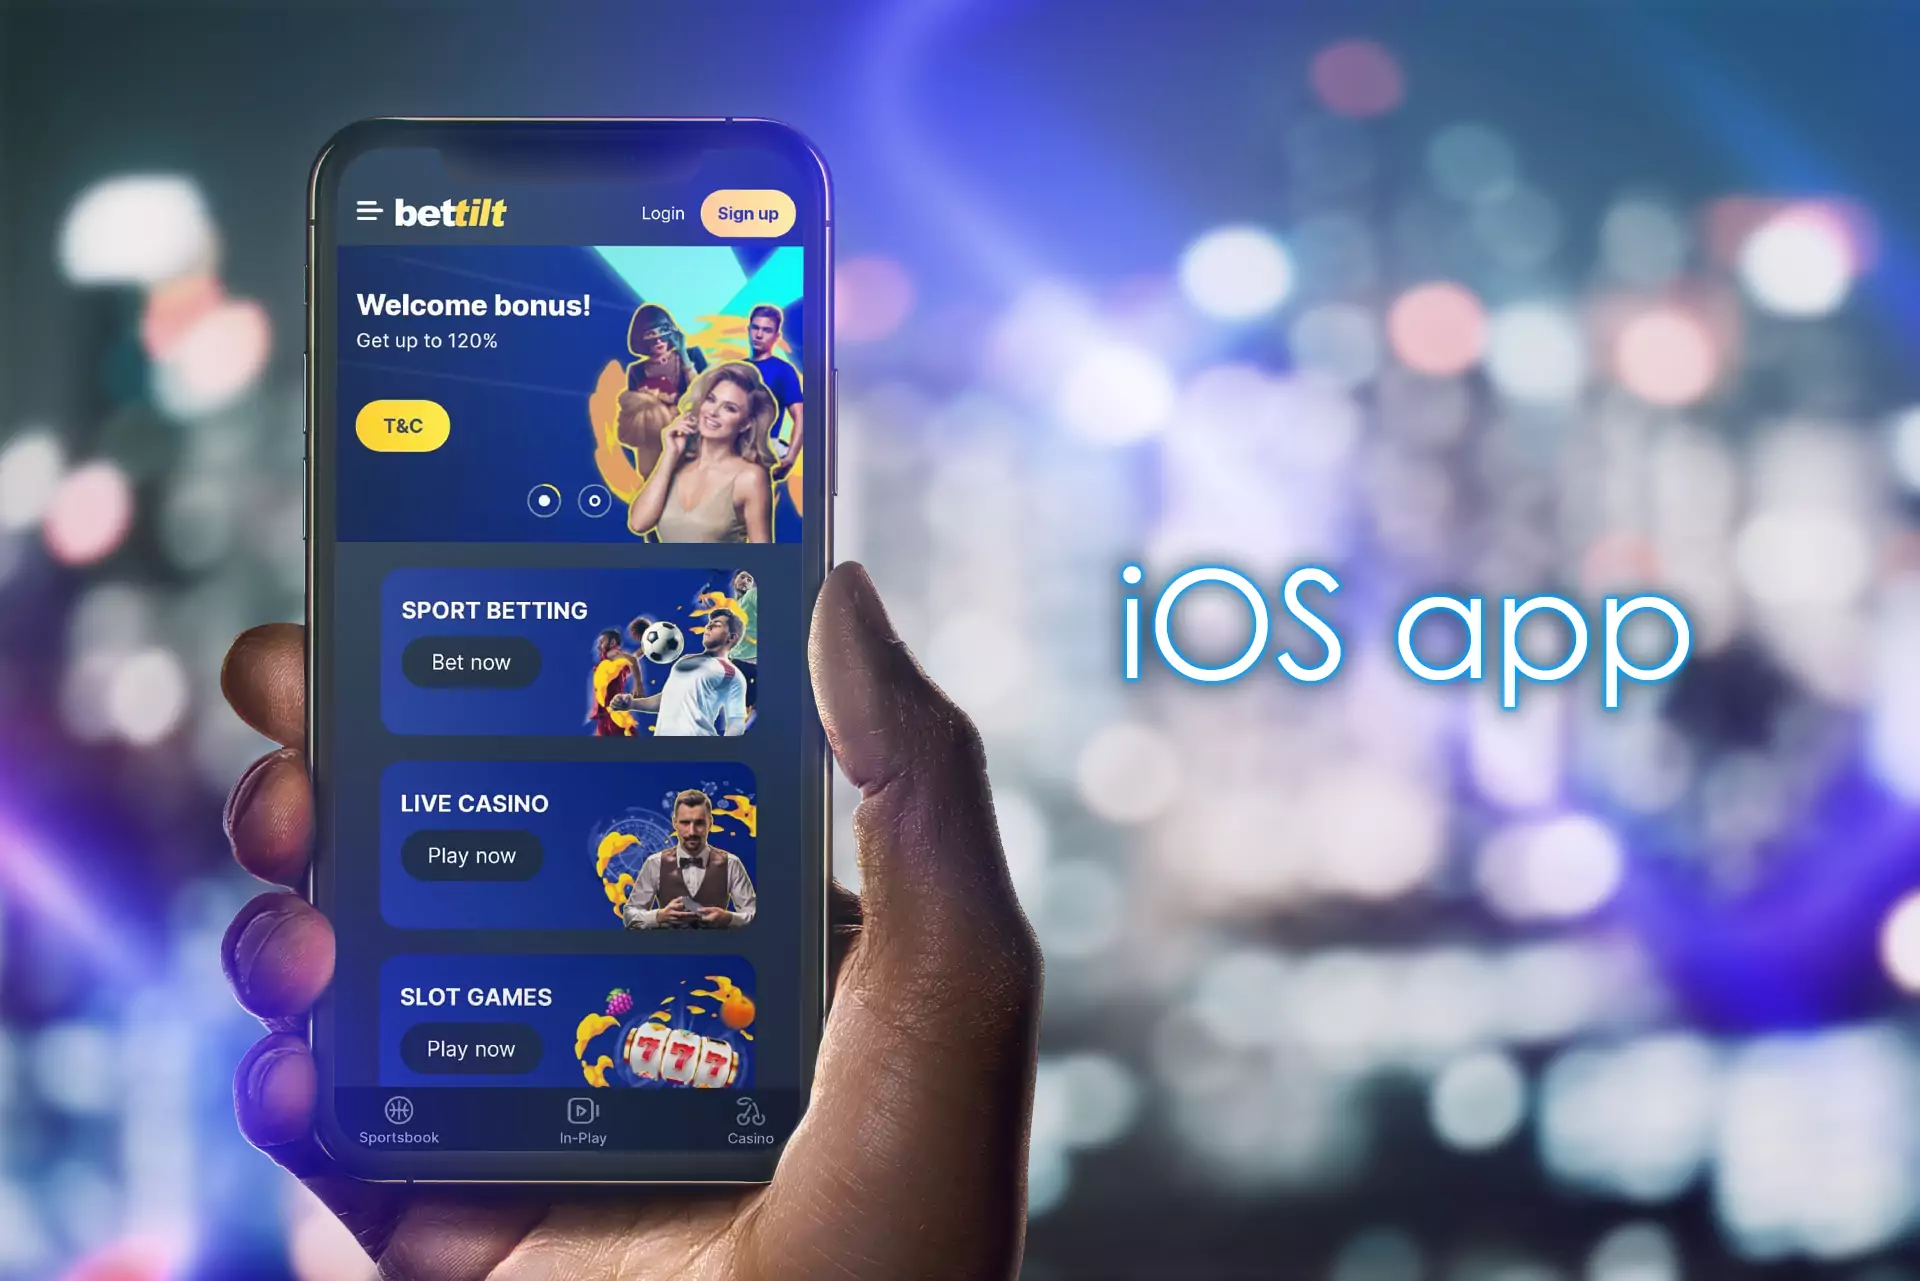 The Bettilt team also developed the app for iOS.